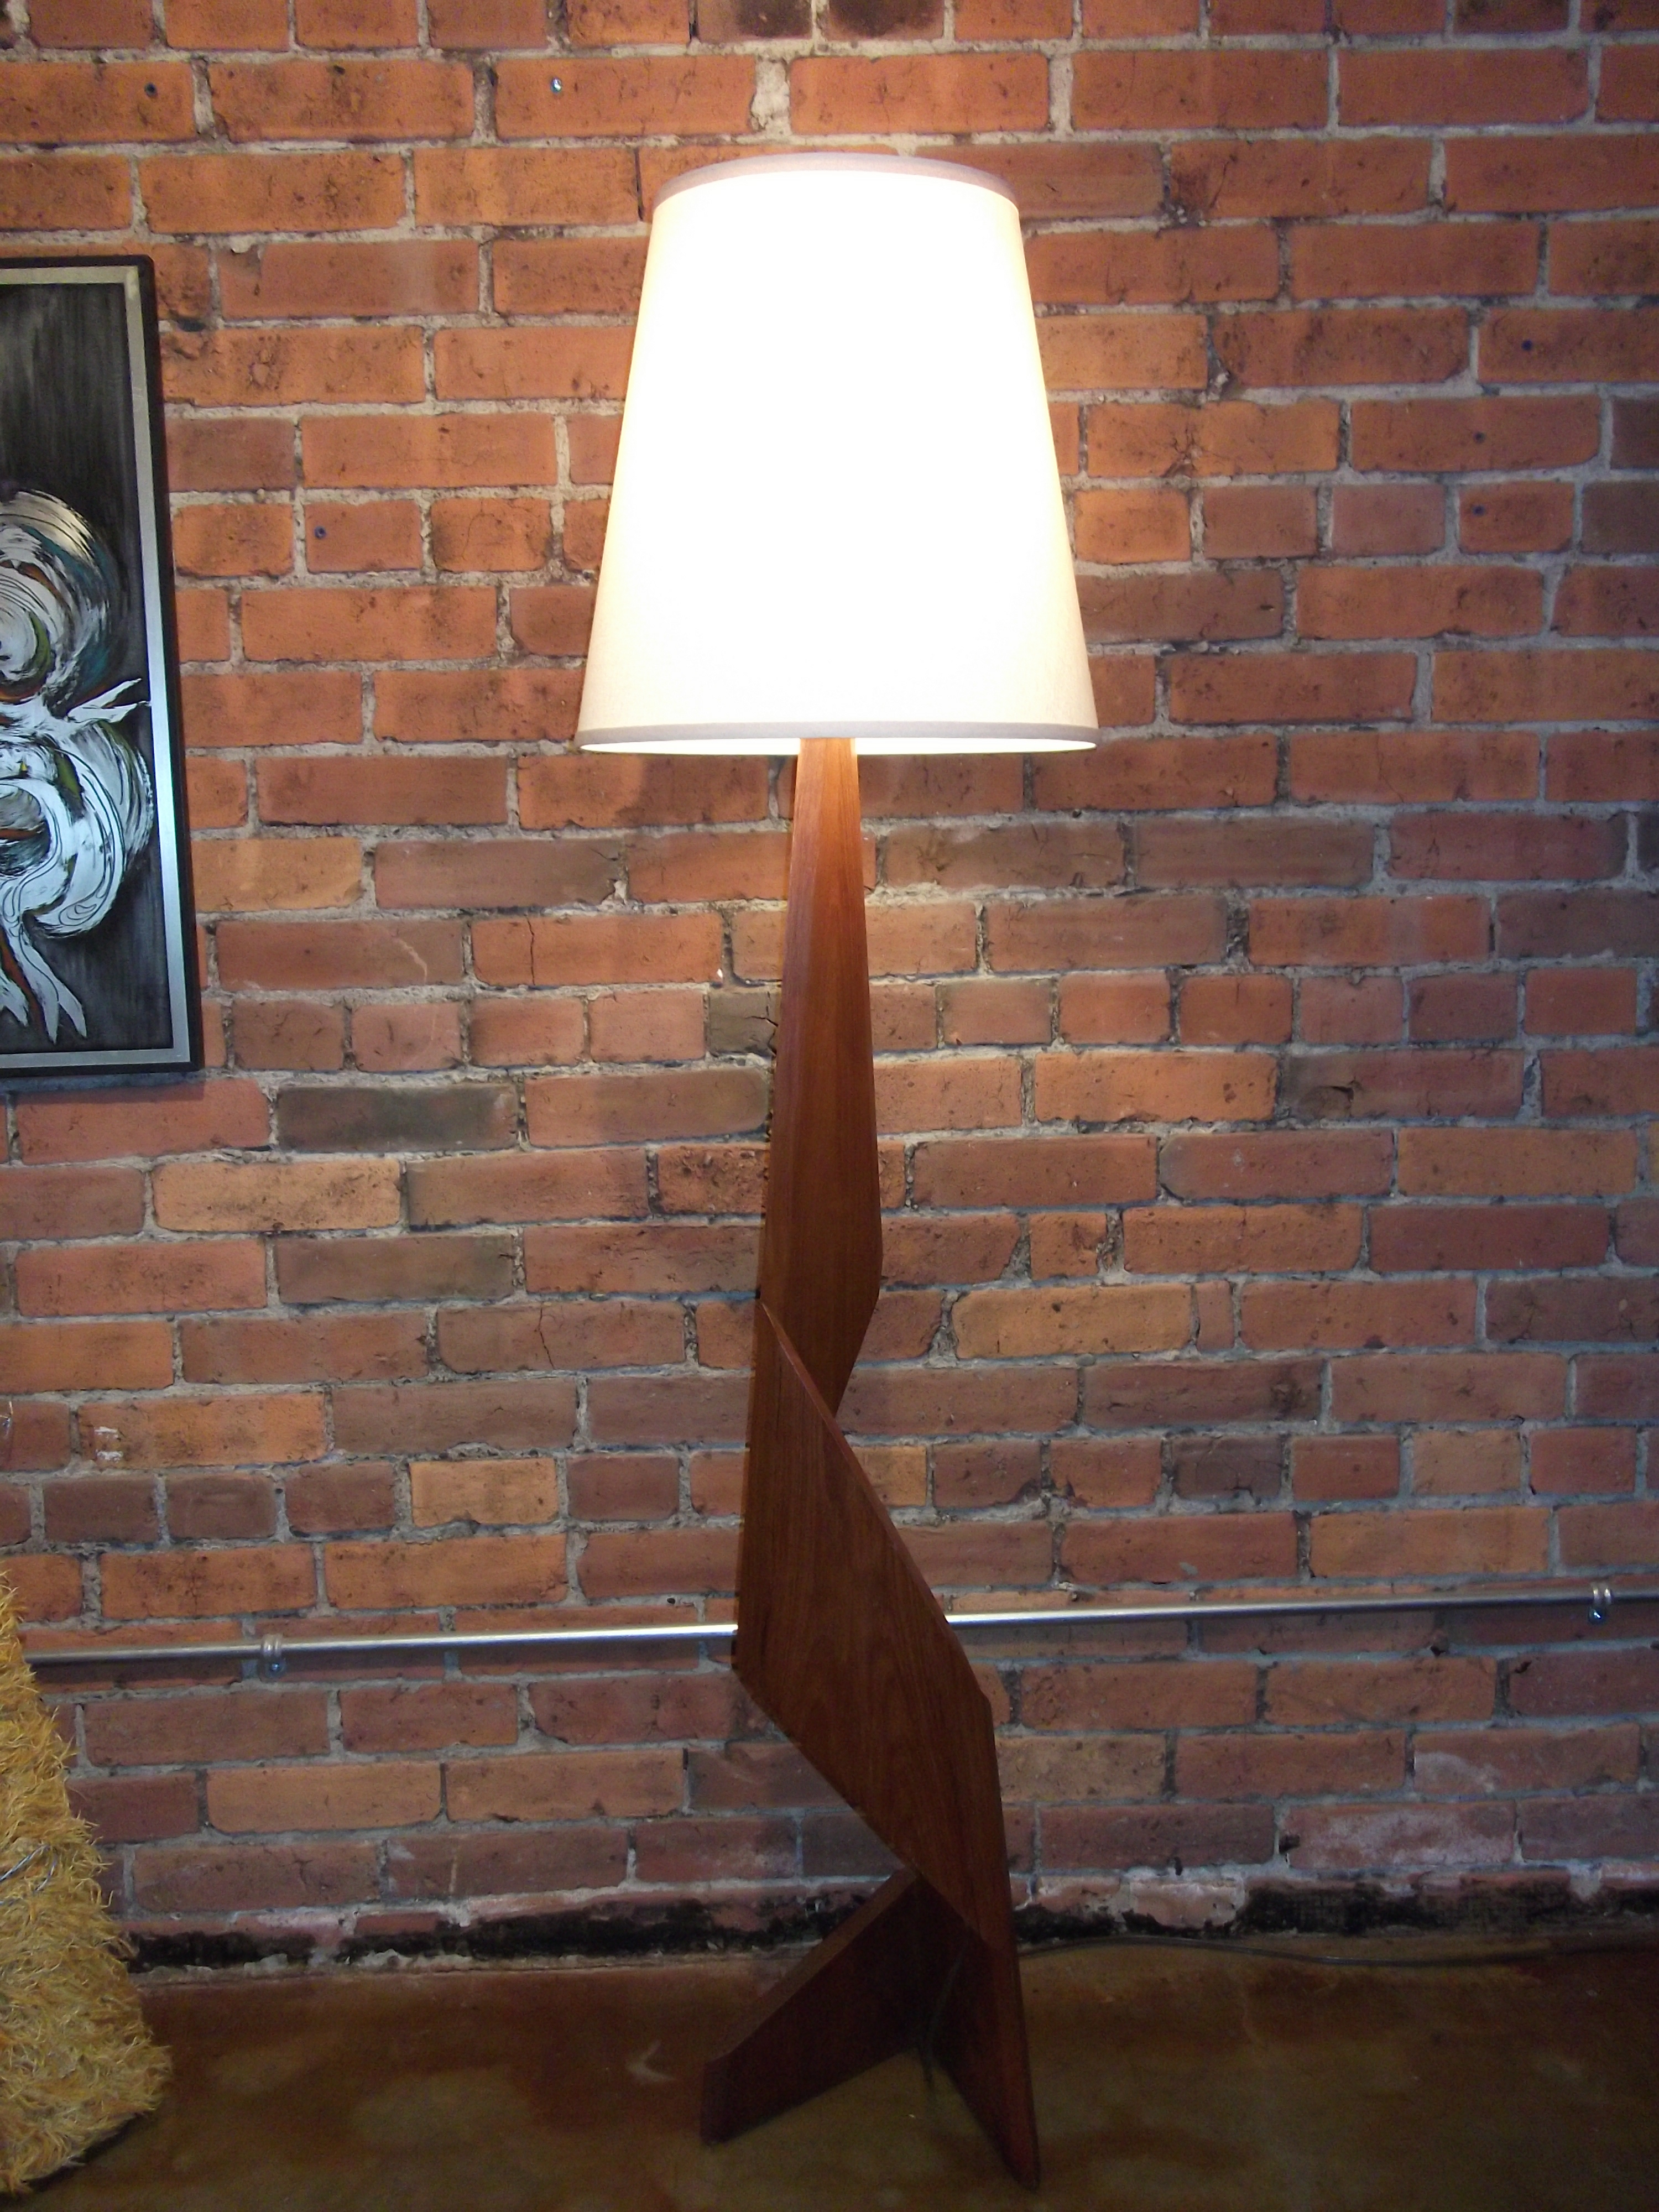 Inventrush Floor Lamps Victoria Bc intended for measurements 3000 X 4000